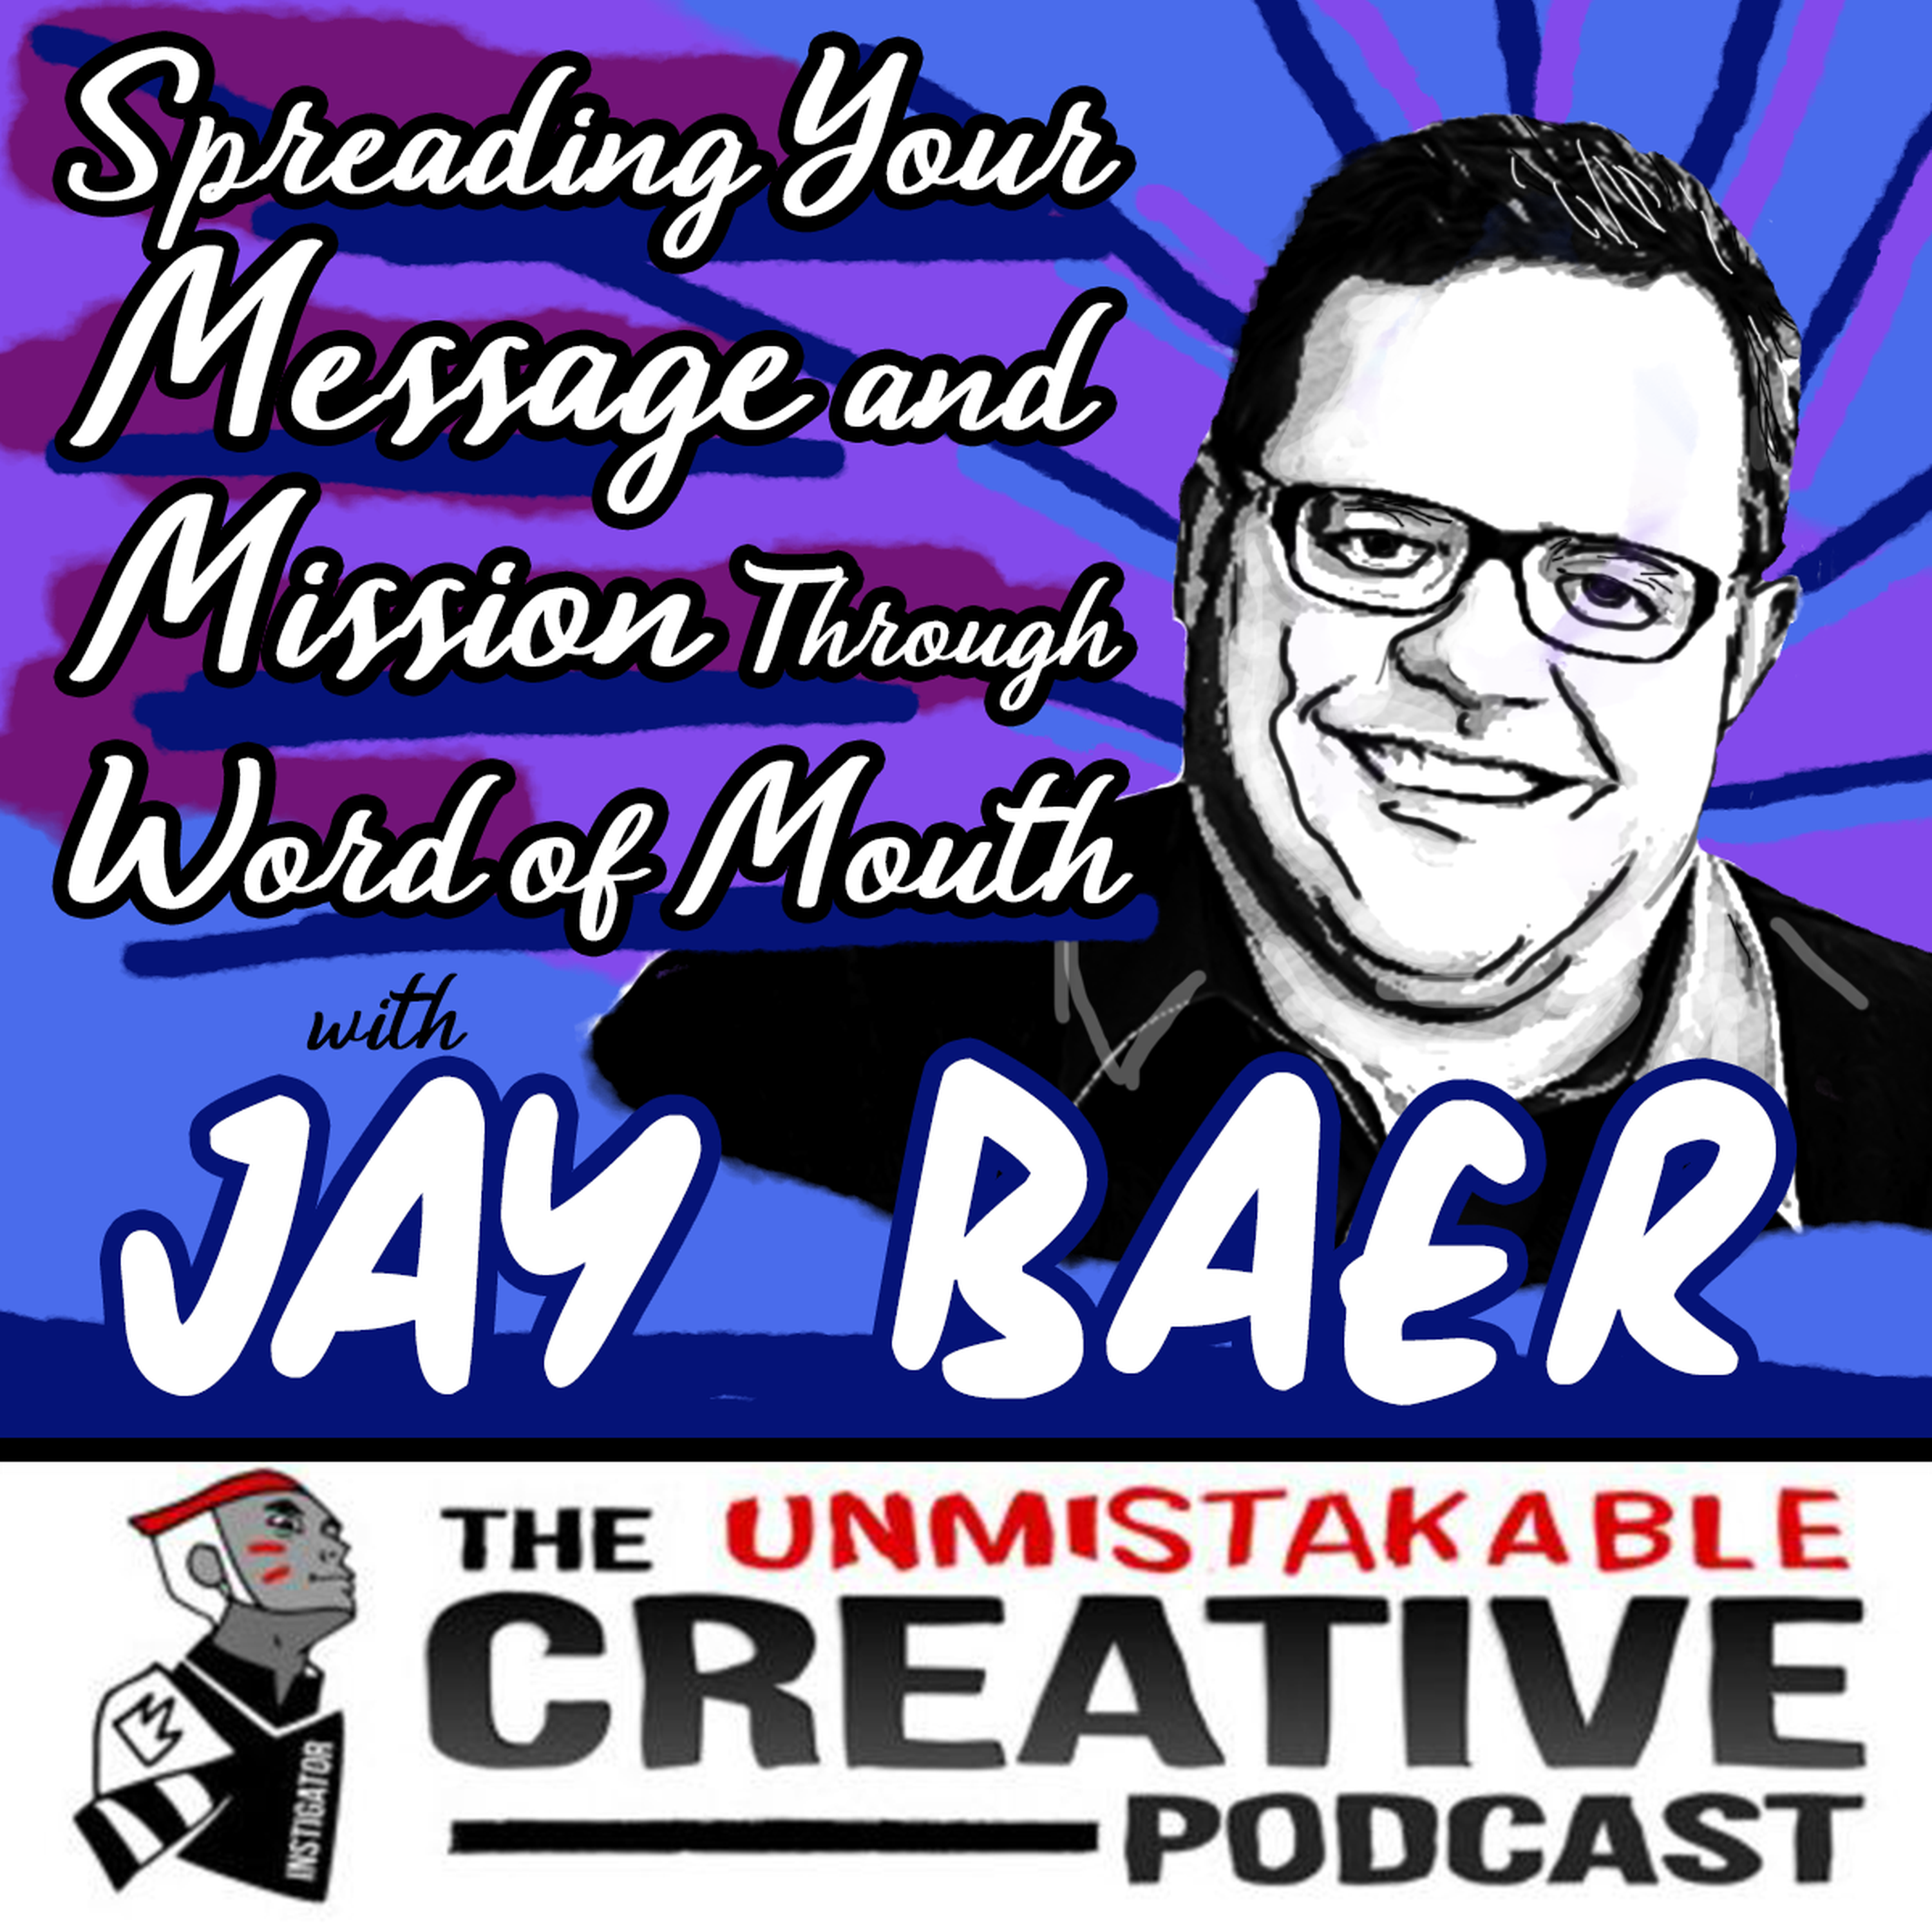 Spreading Your Message and Mission through Word of Mouth with Jay Baer Image